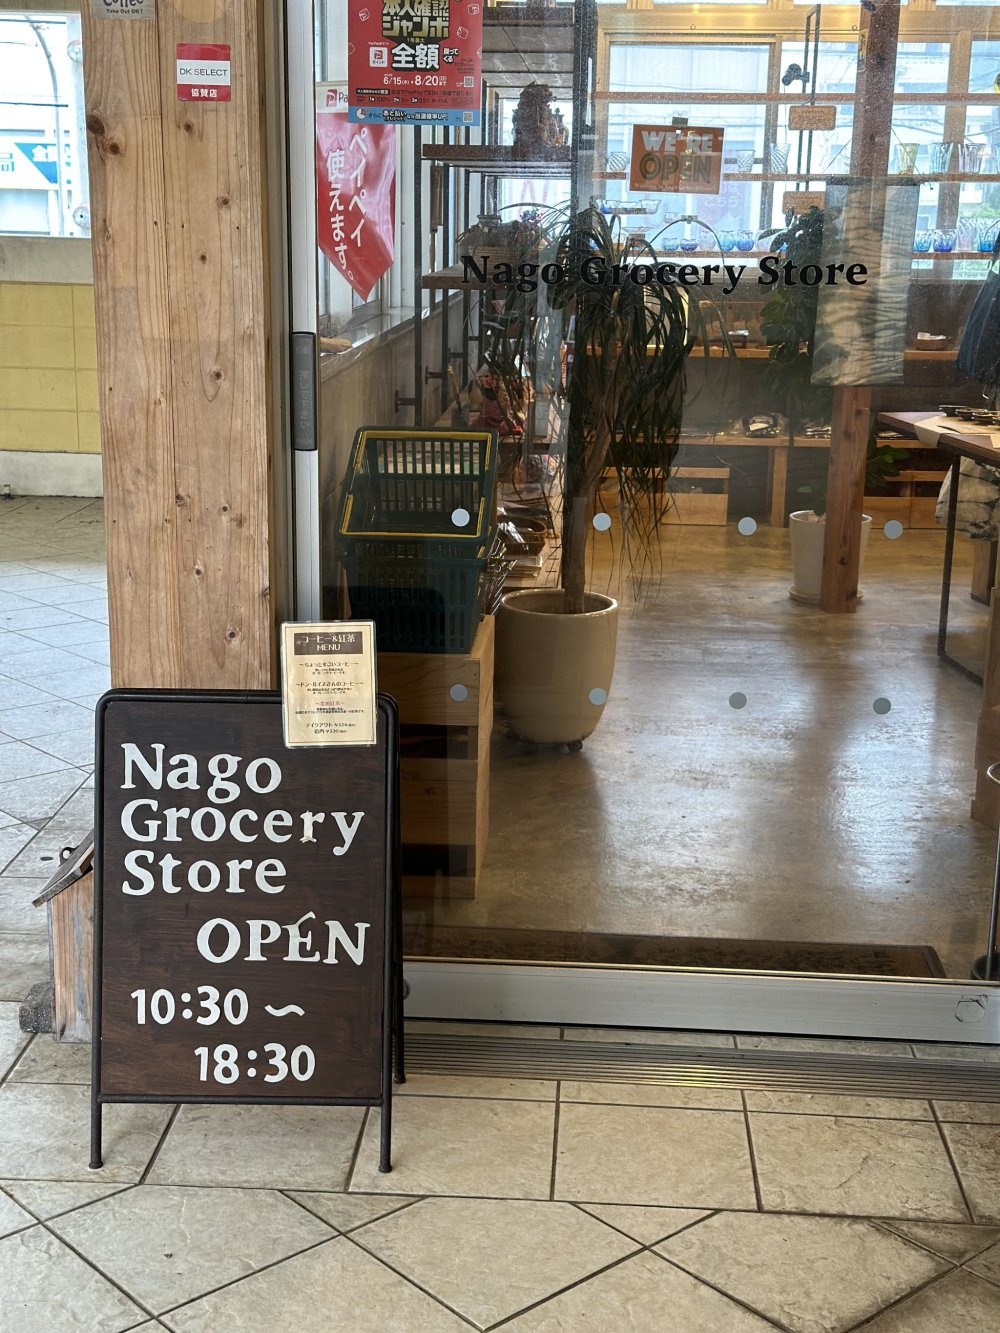 Nago Grocery Store, a cool souvenir and home goods store in Nago